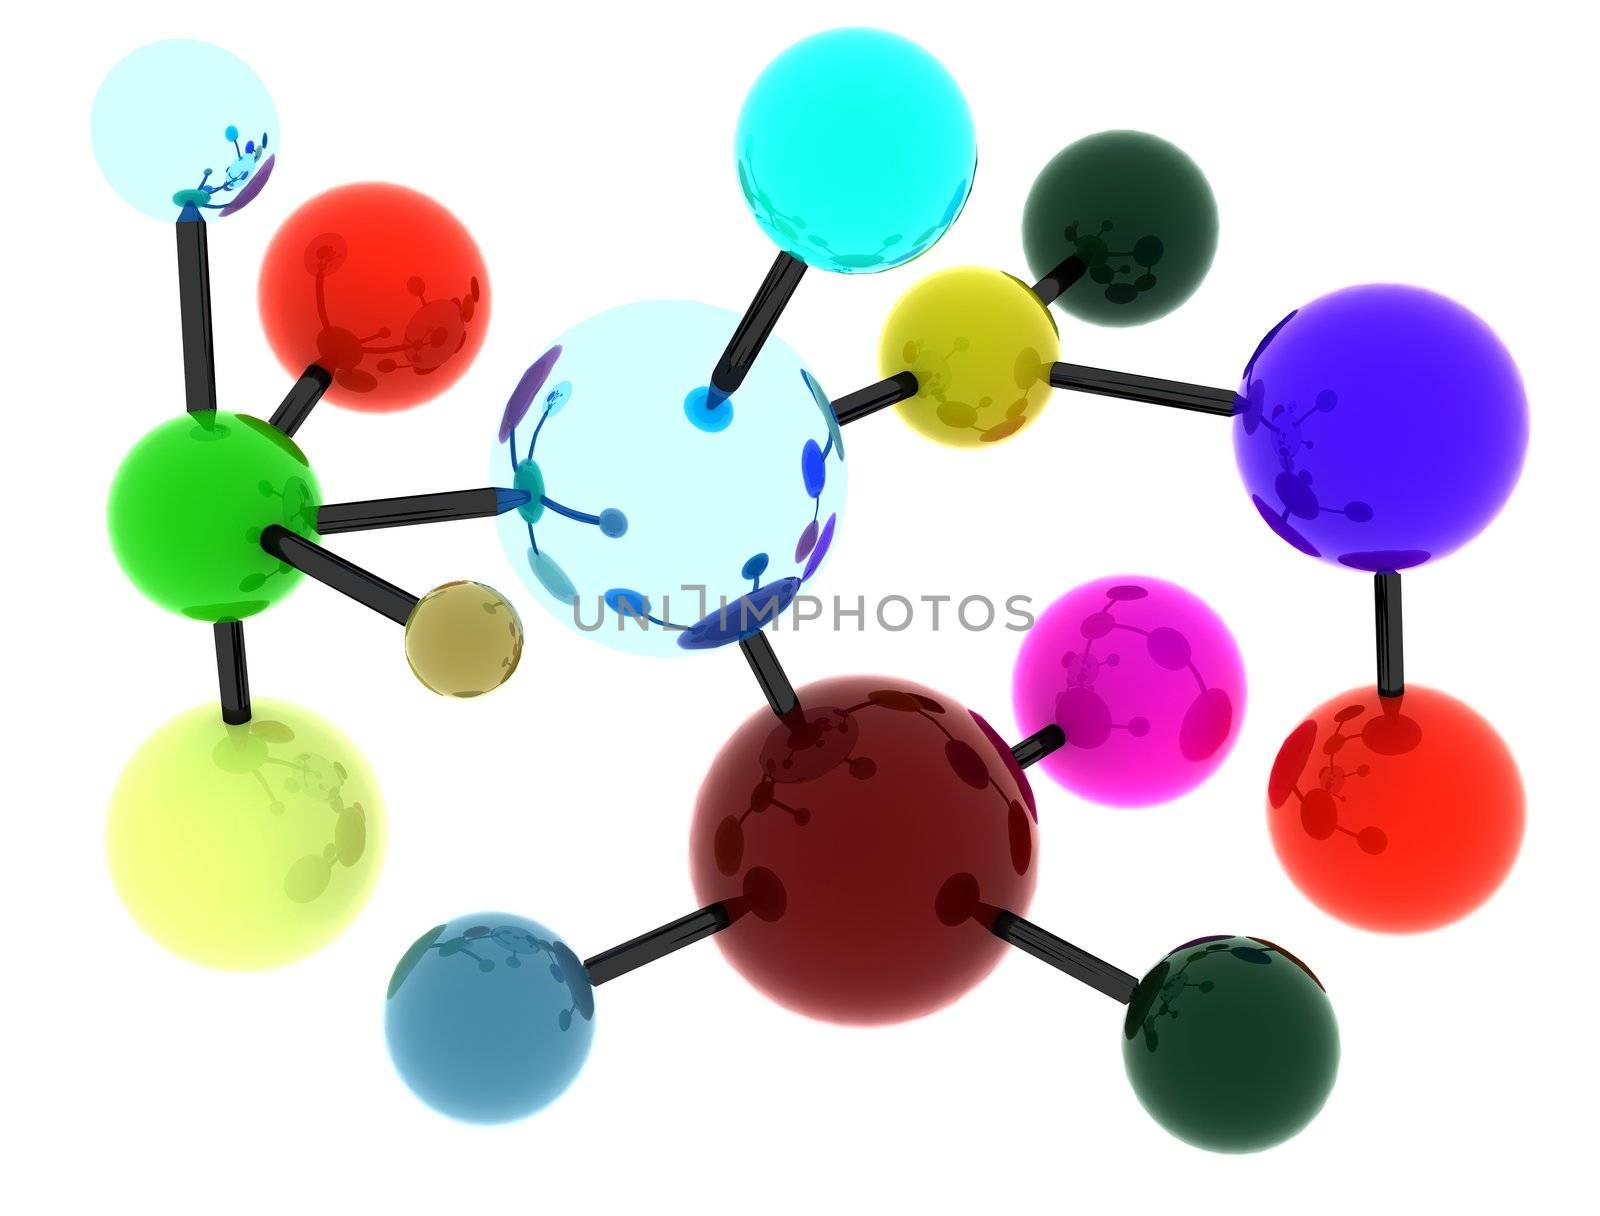 Concept of abstract molecular structure portrayed by slightly reflective spheres in bright colors interconnected by black cylinders forming linkage. Scene rendered and isolated on white background.